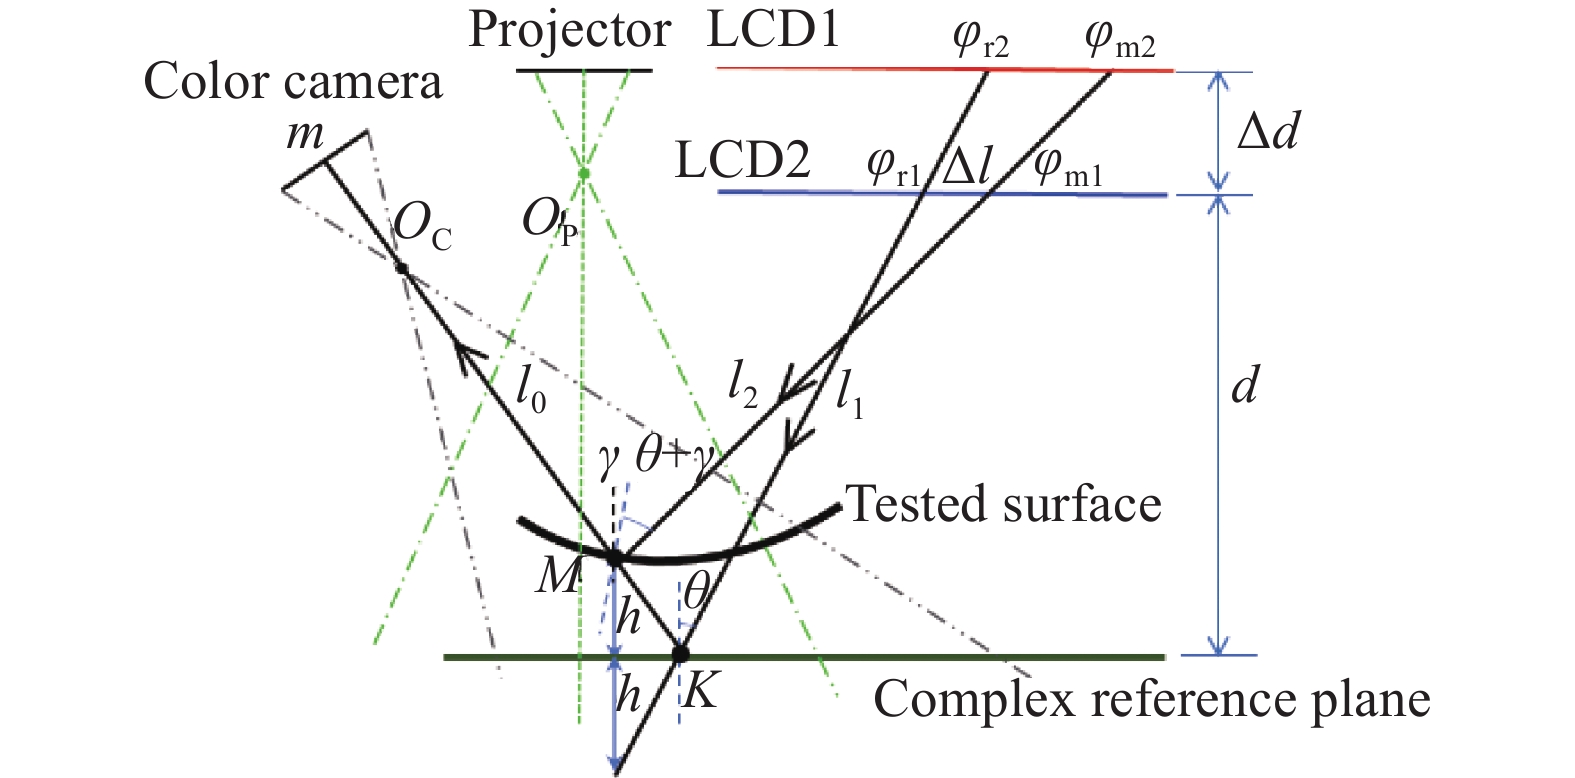 Measurement schematic diagram of complex surface based on projection and reflection of structured light